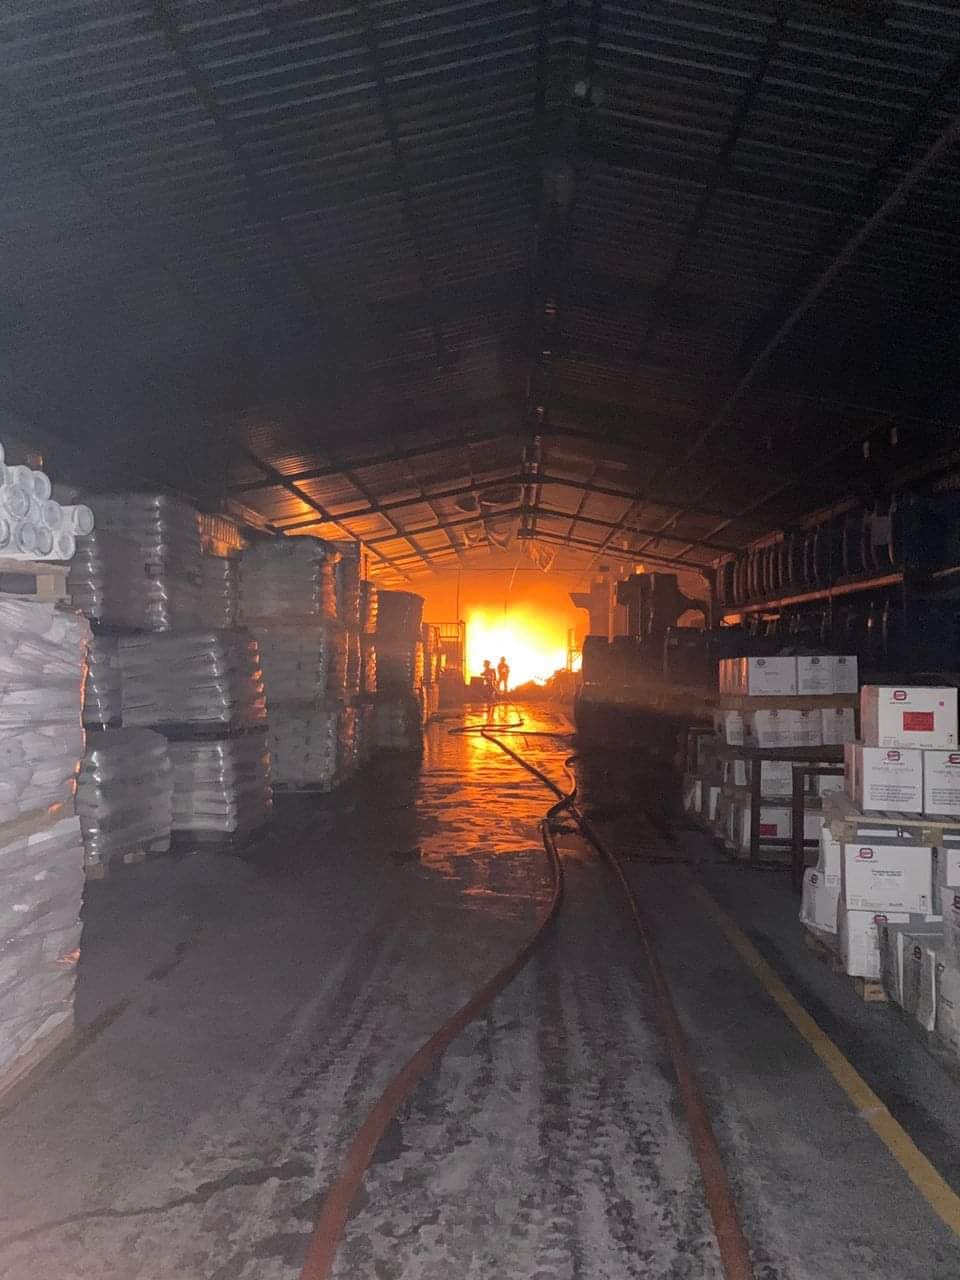 Fire engulfs paint powder processing factory in pj, no casualties reported | weirdkaya